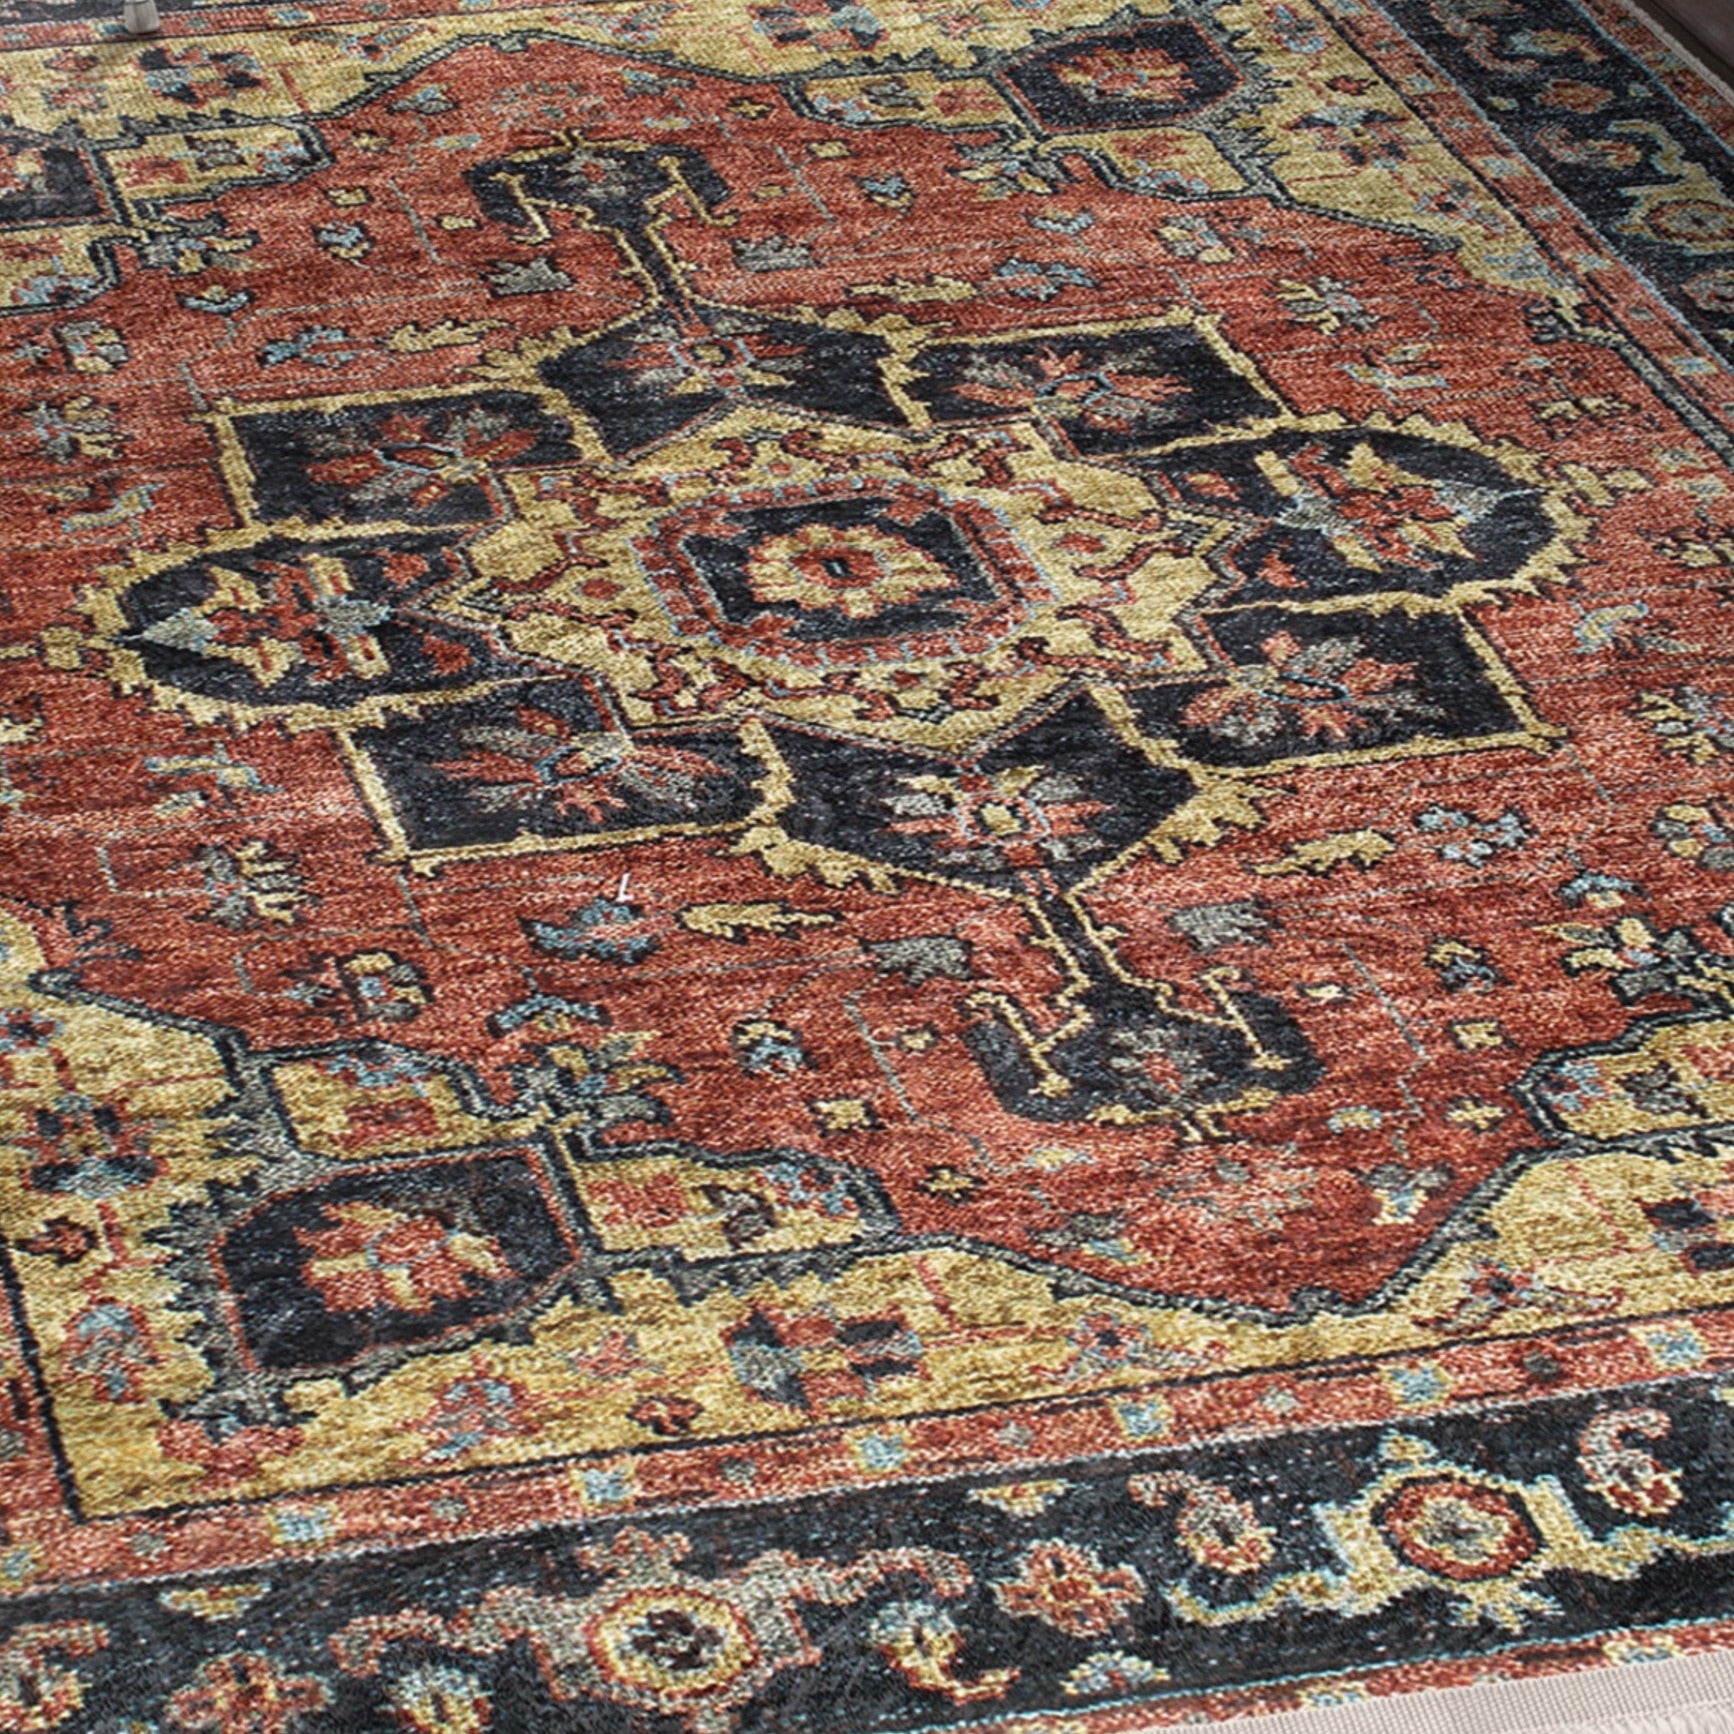 Homeezone Patterned Area Rug - Close-up